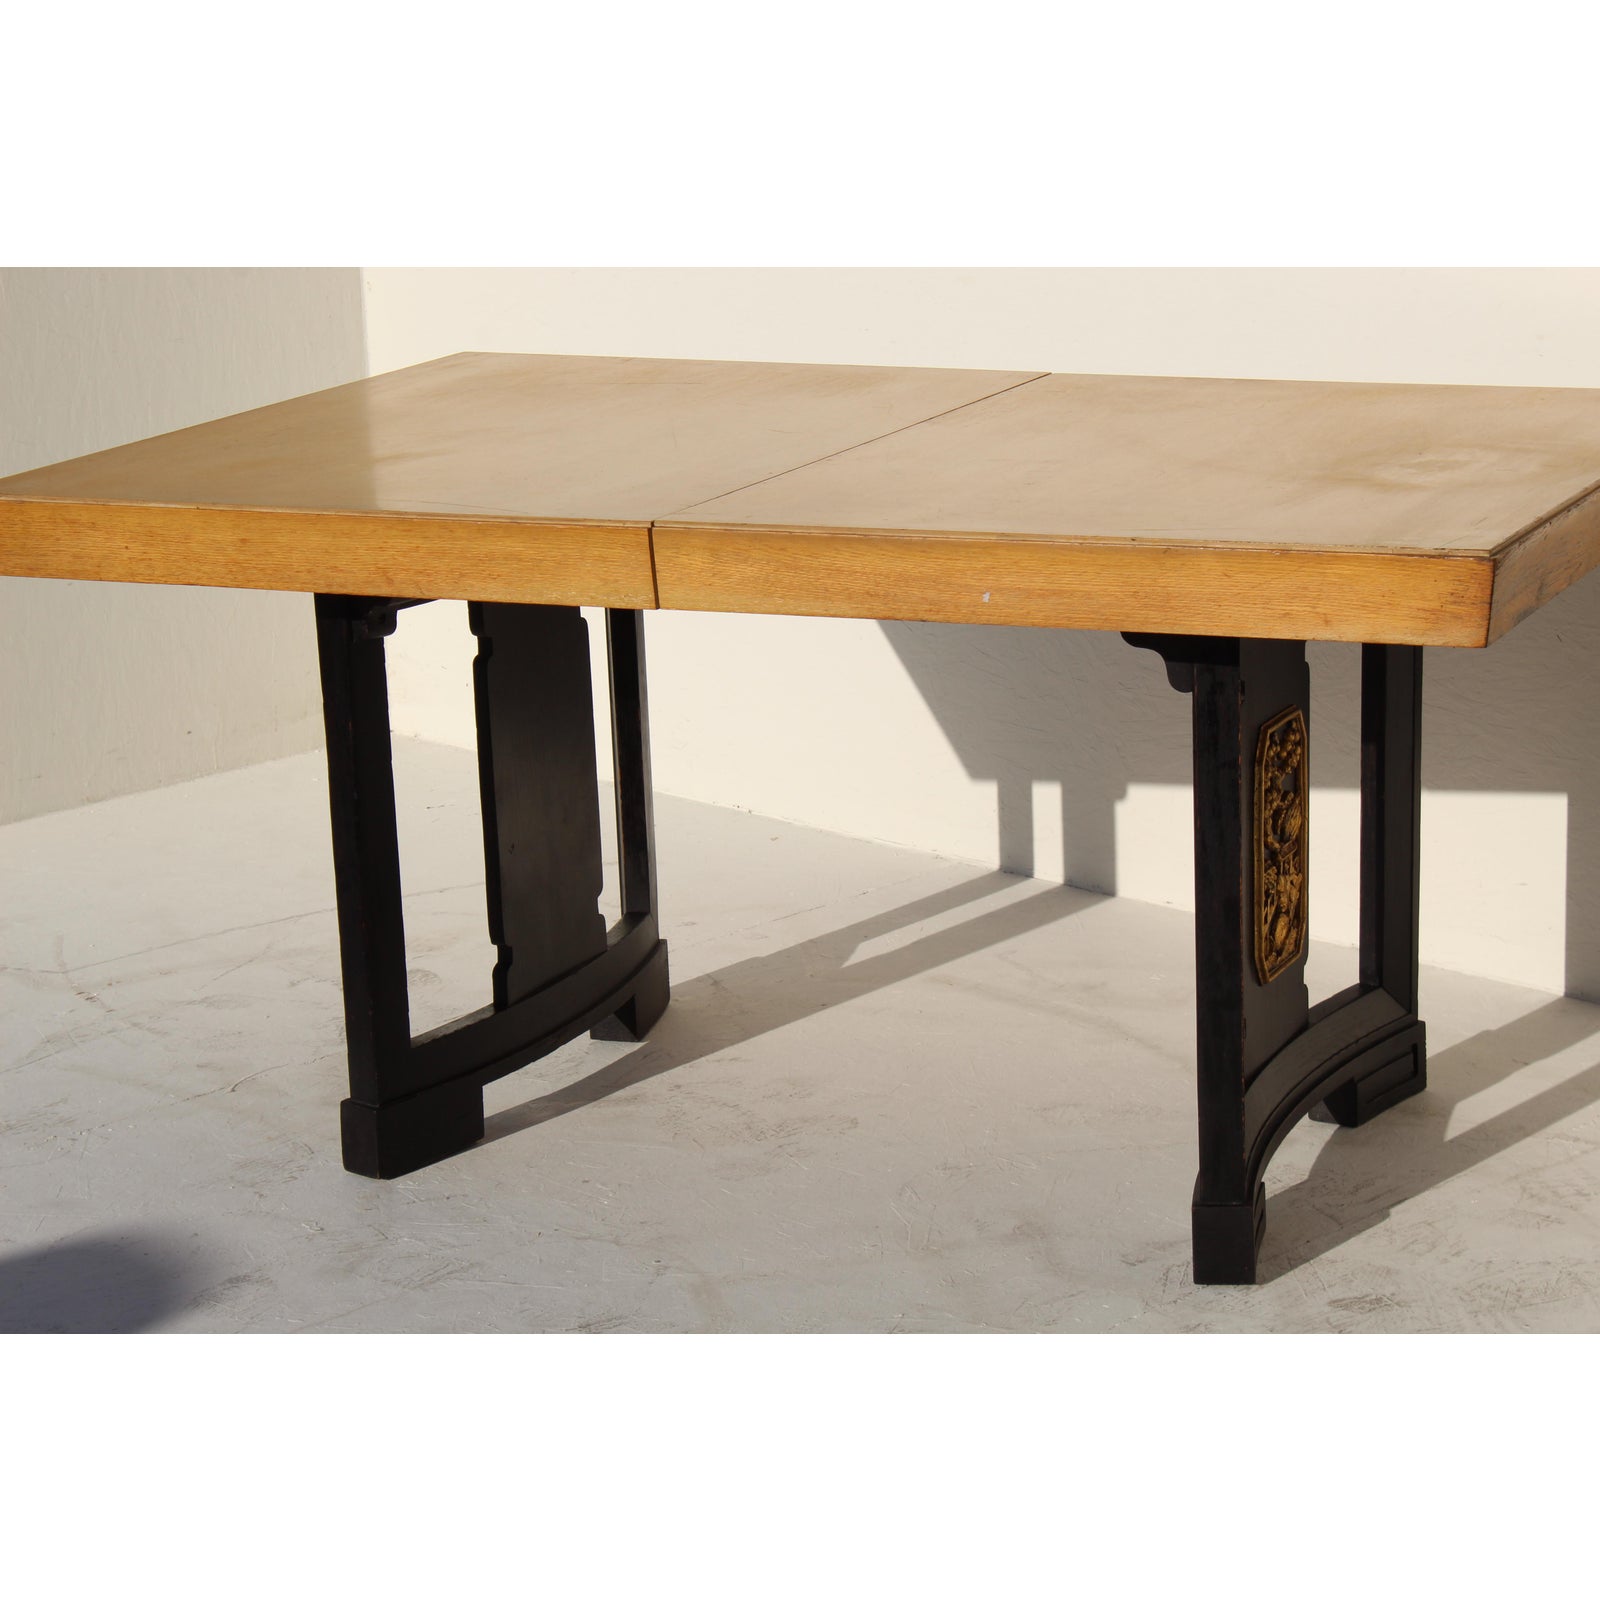 1940s-vintage-james-mont-dining-table-0419